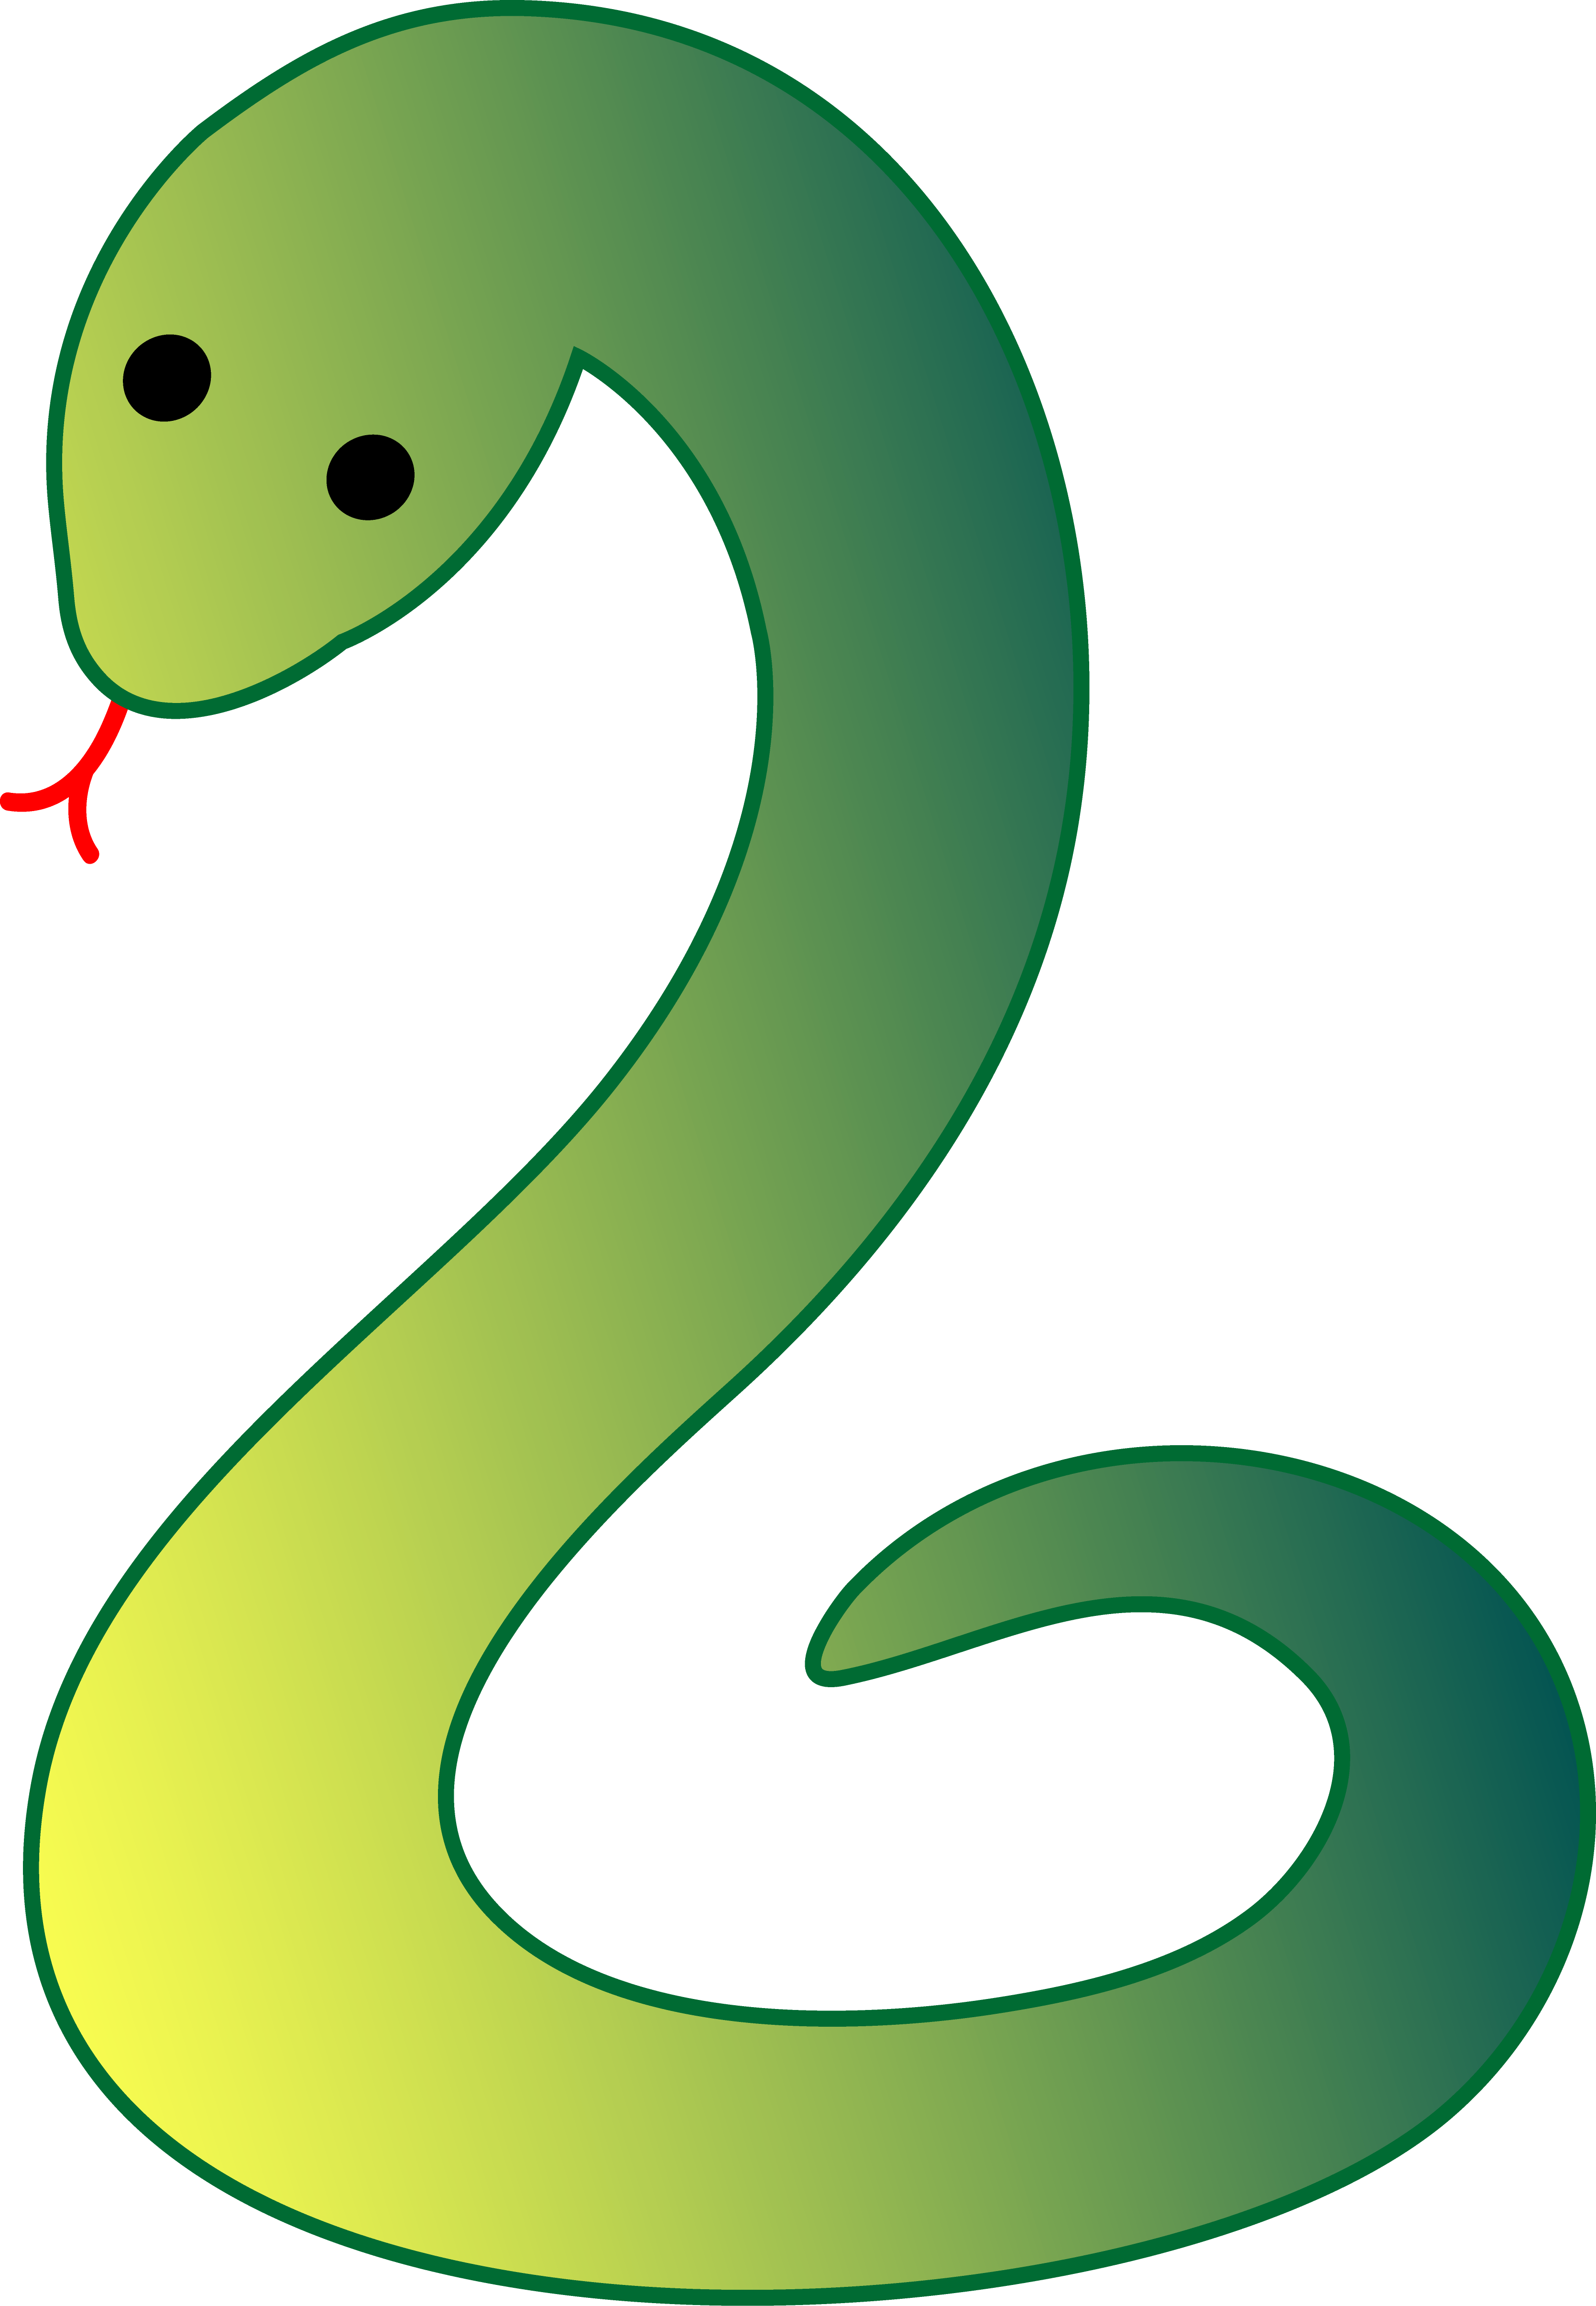 Clipart man ladder. Cute snake black and